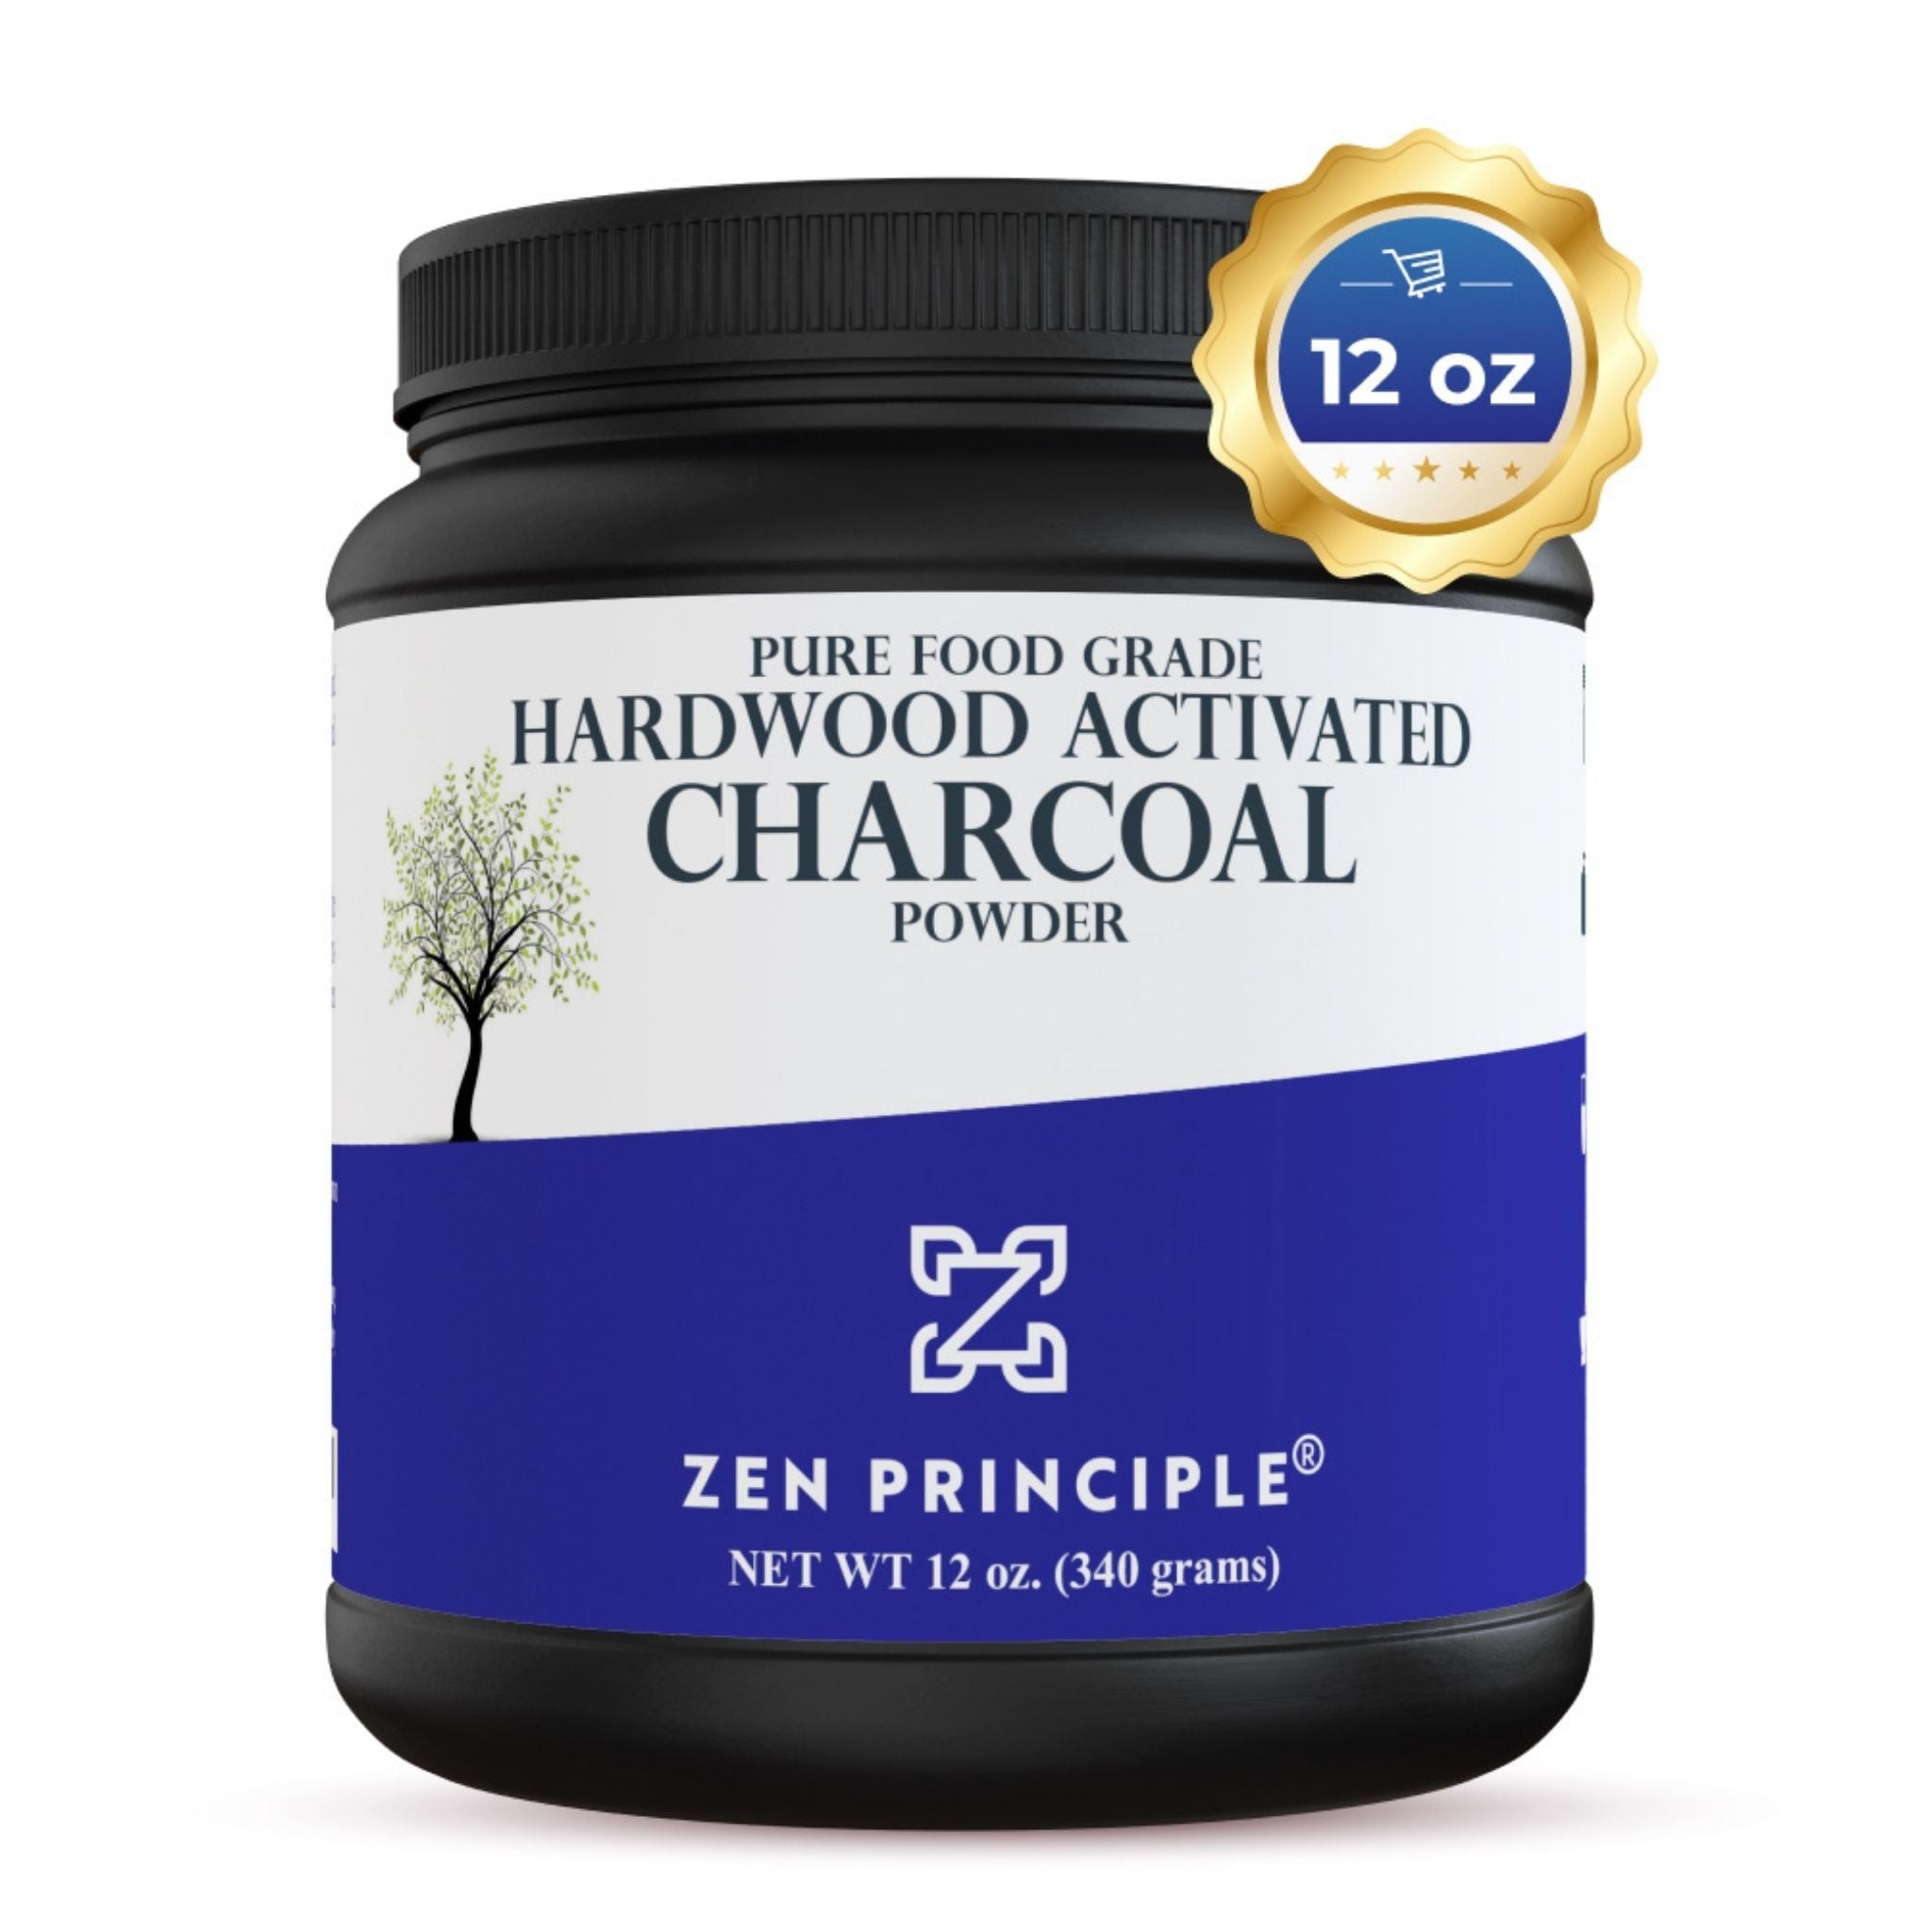 Activated Charcoal Powder Only from USA Hardwood Trees. All Natural. Whitens Teeth, Rejuvenates Skin and Hair, Detoxifies, Helps with Digestion